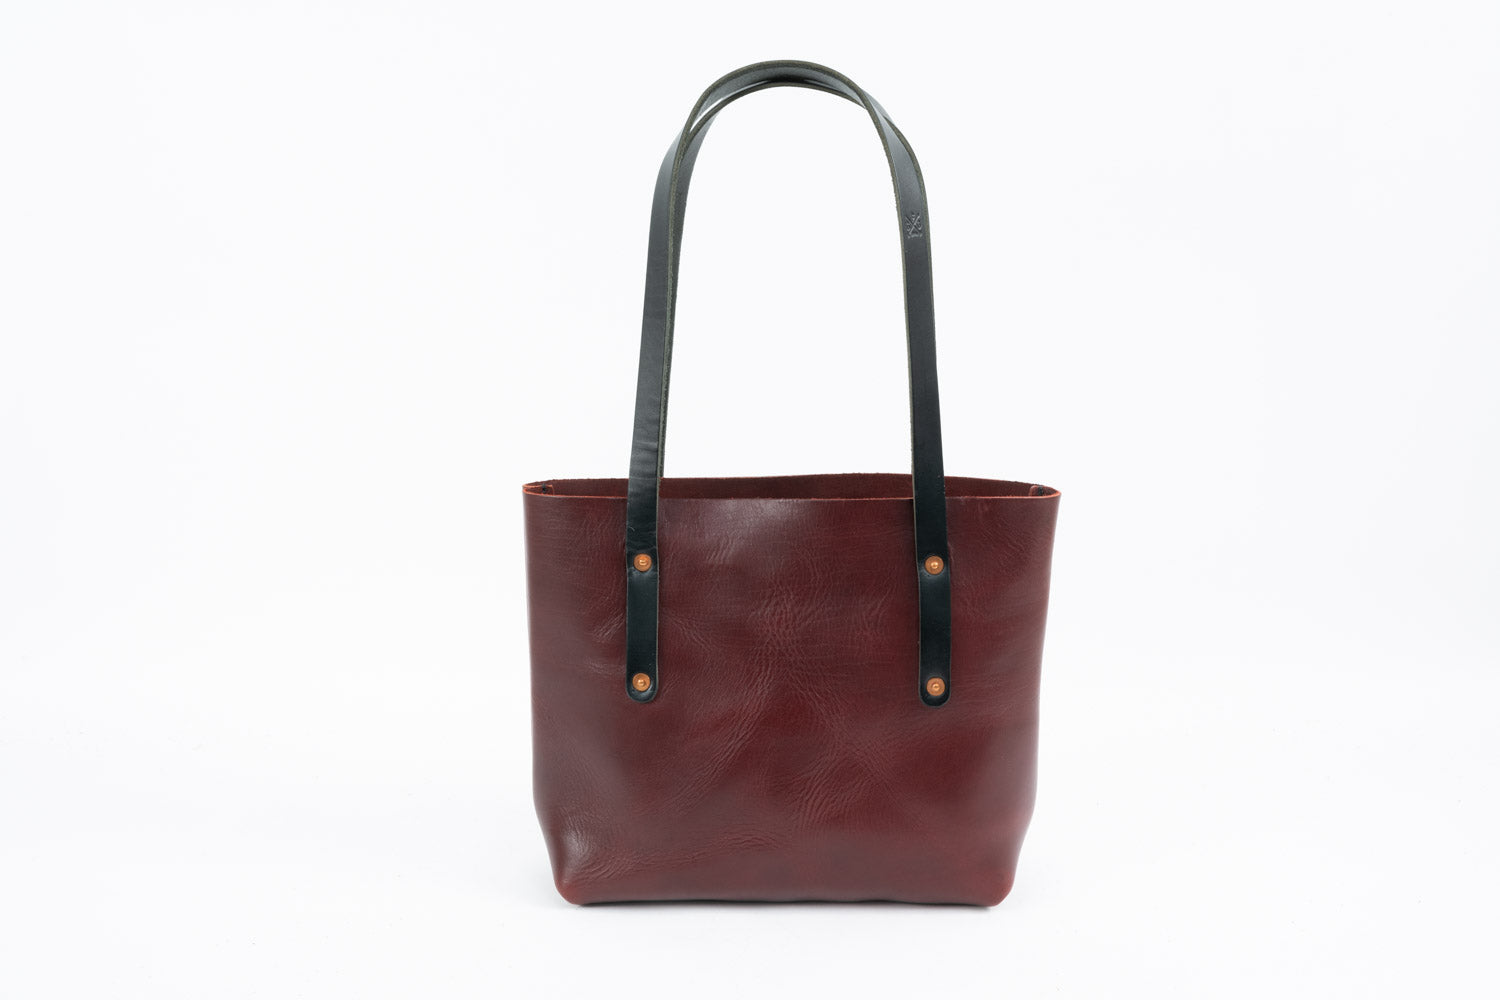 AVERY LEATHER TOTE BAG - SMALL OXBLOOD (RTS)